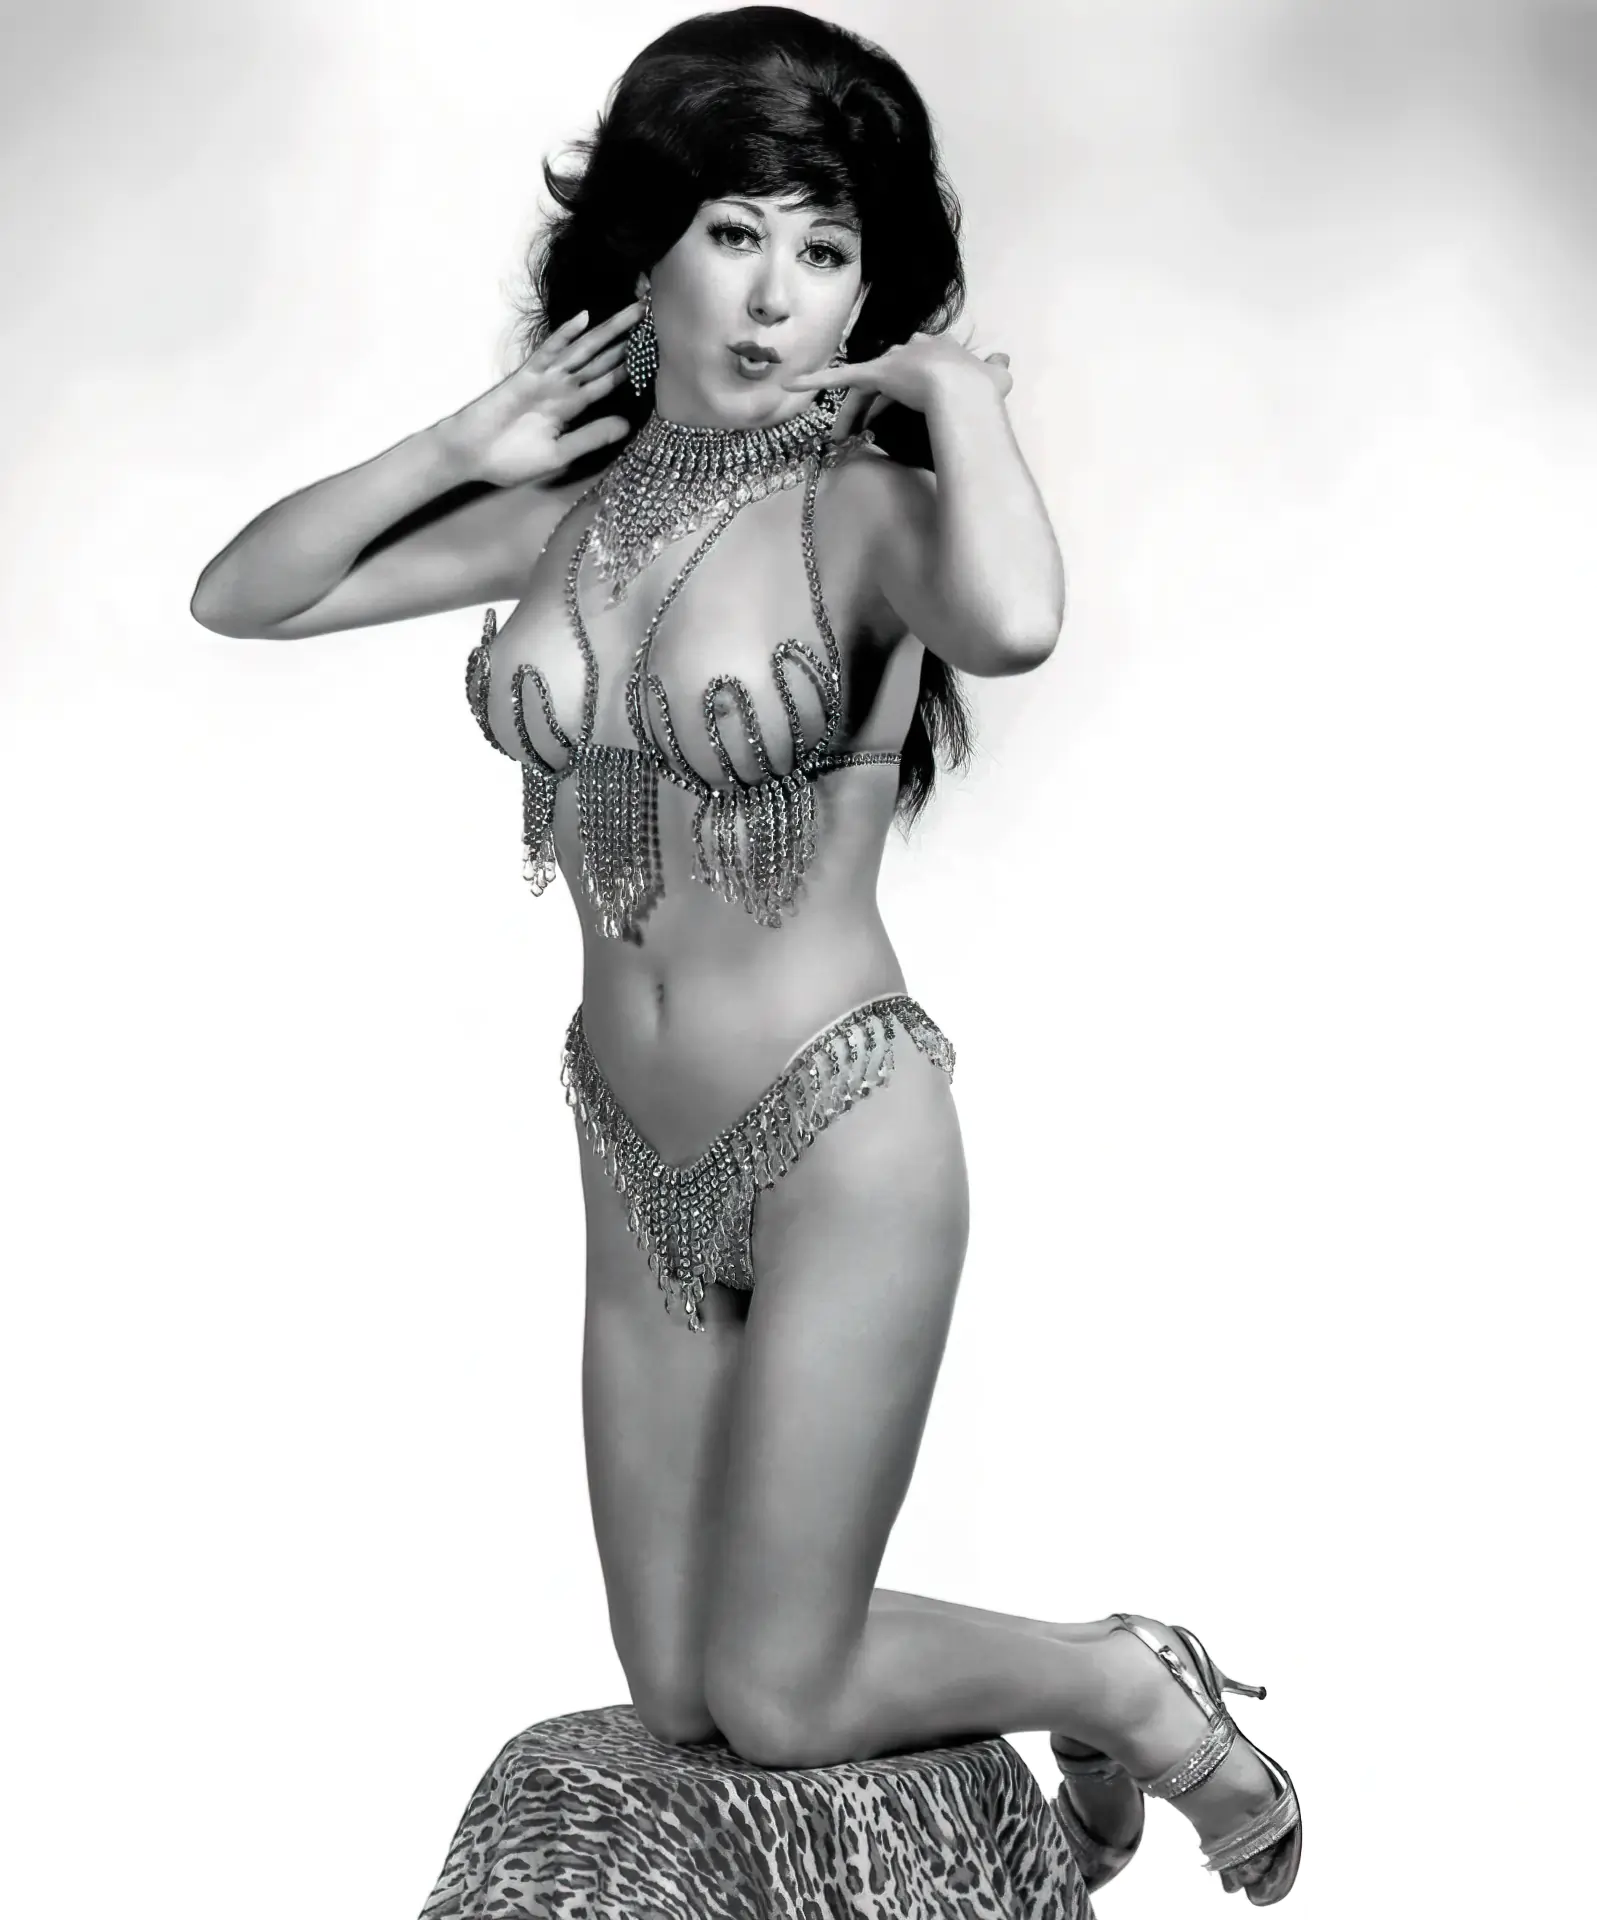 Brunette in a vintage burlesque bikini with her boobs peeking out